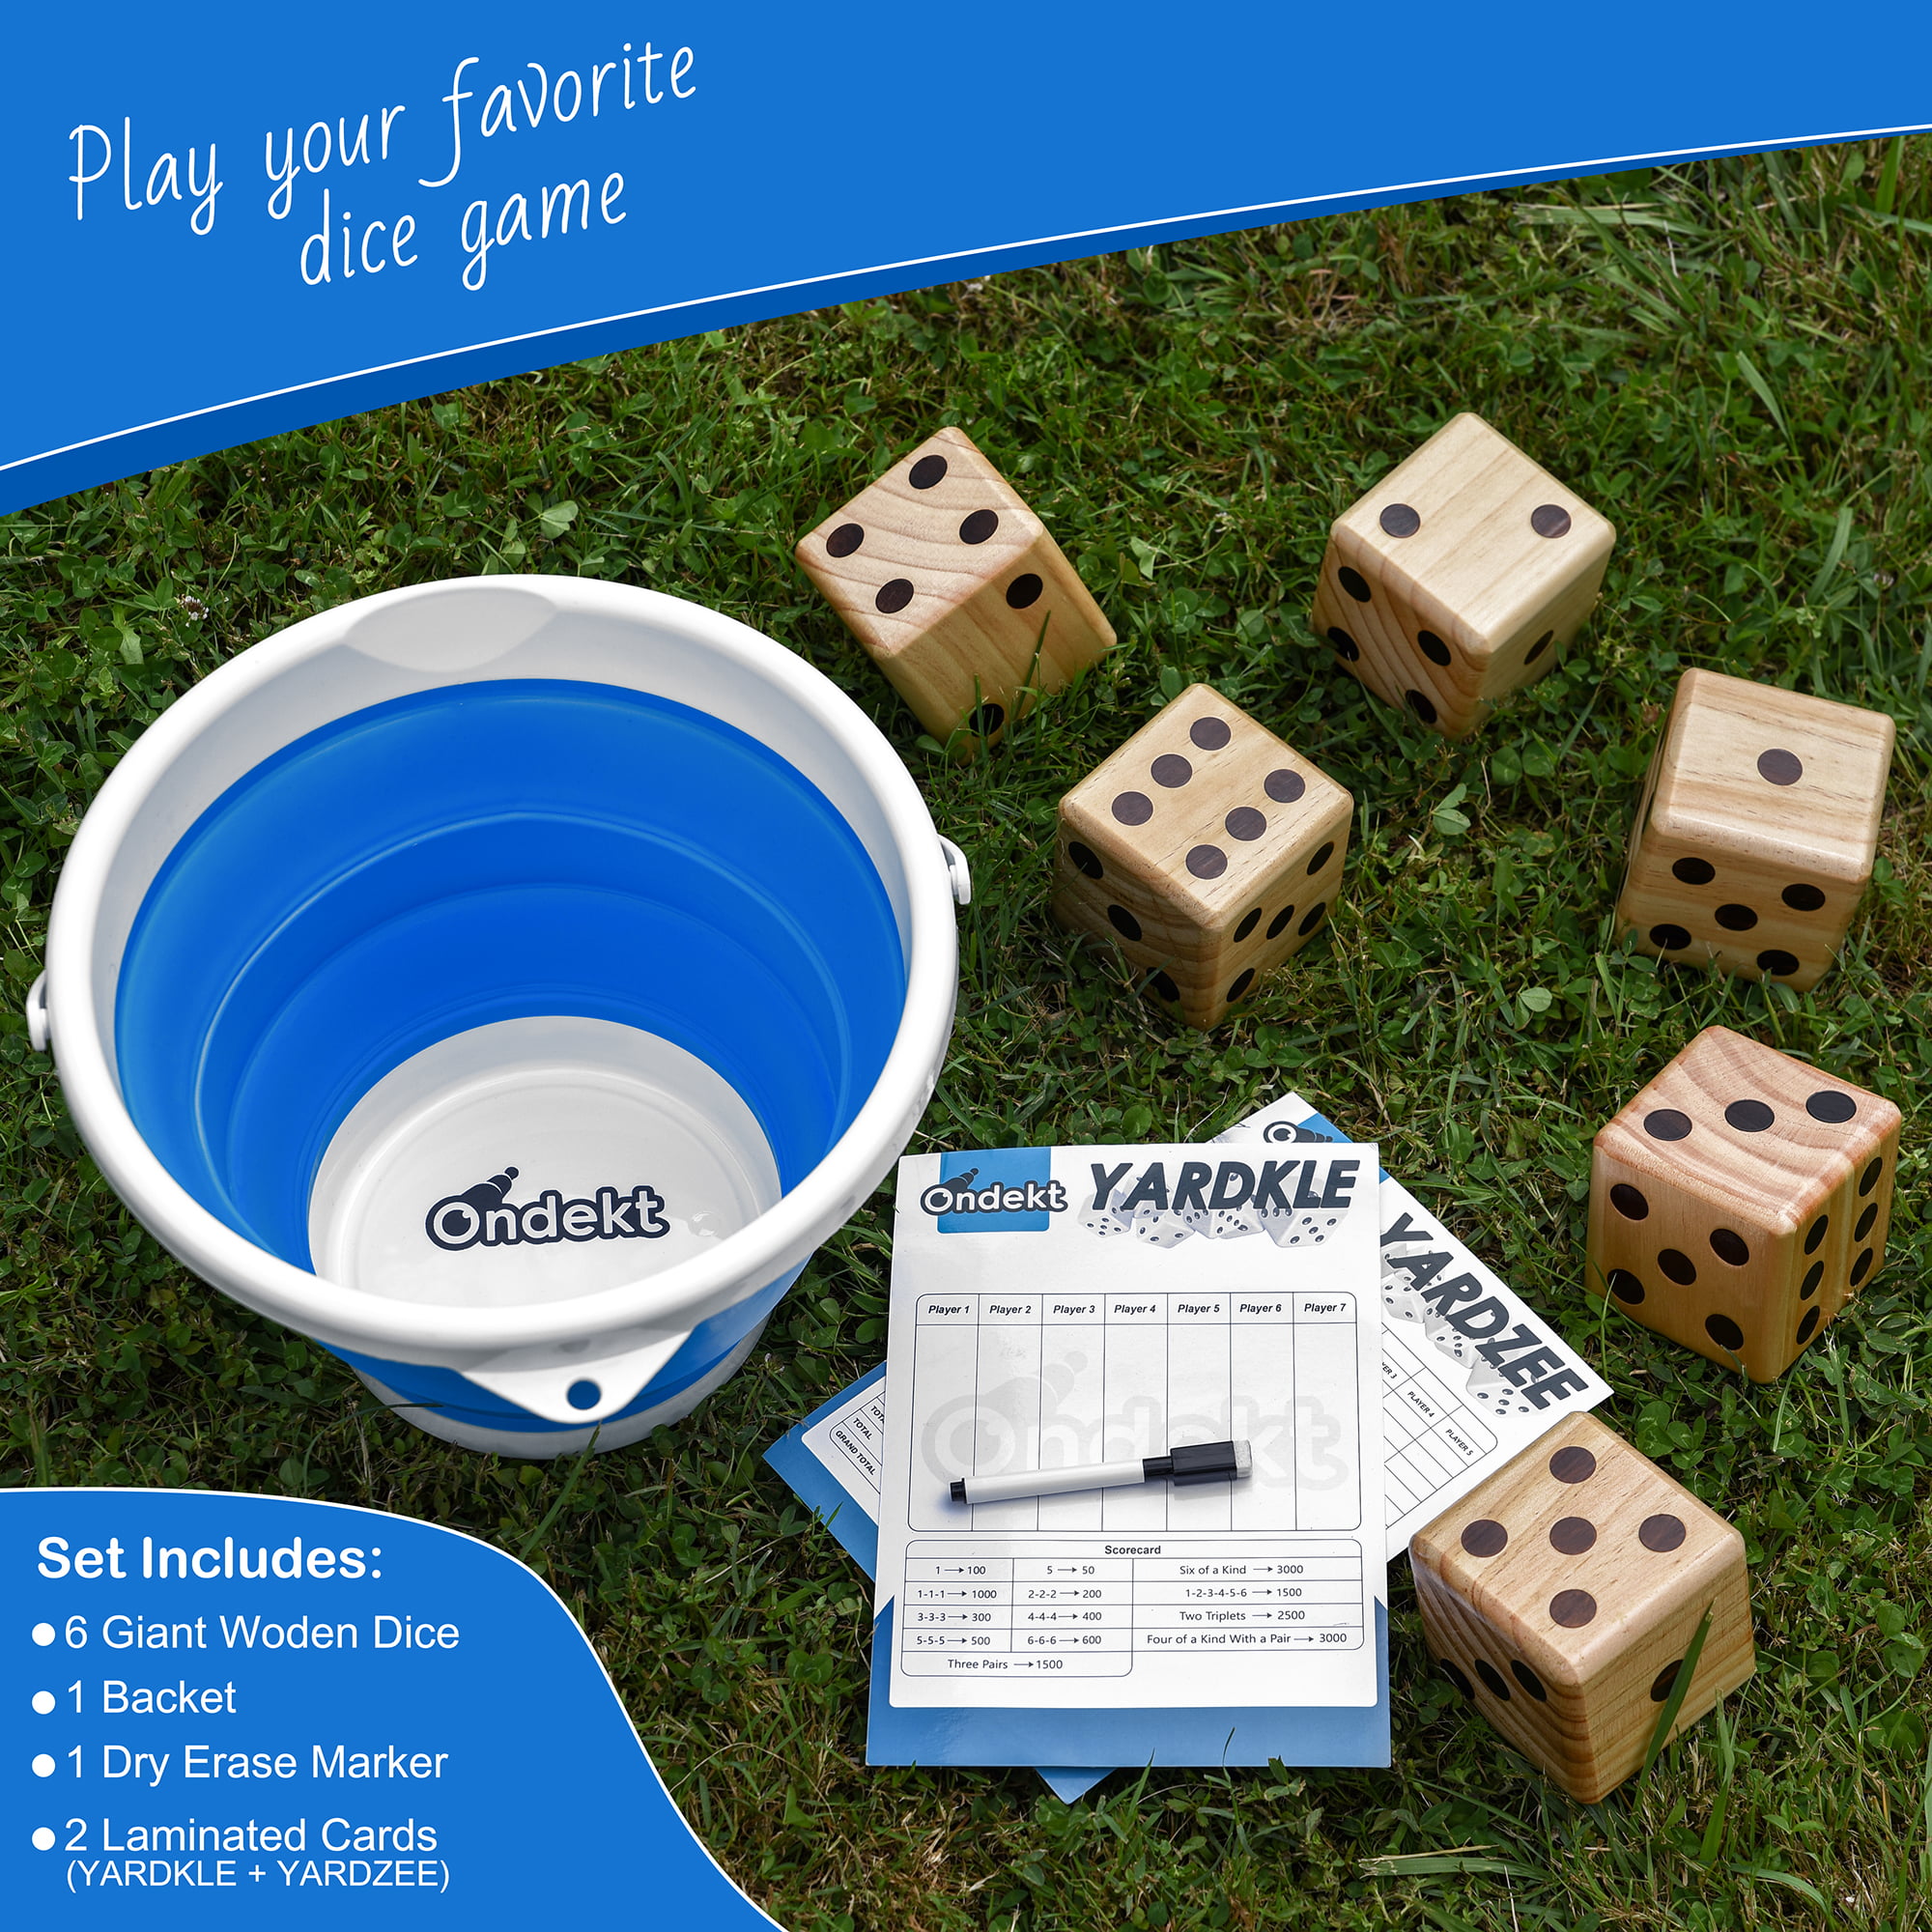 Splinter-Free and Crack-Proof Wood Jumbo Size with Collapsible Bucket Giant Wooden Yard Dice Play Many Games Fun and Engaging Game Time 2 Dry Erase Score Cards Ideal Gift Indoor/Outdoor 